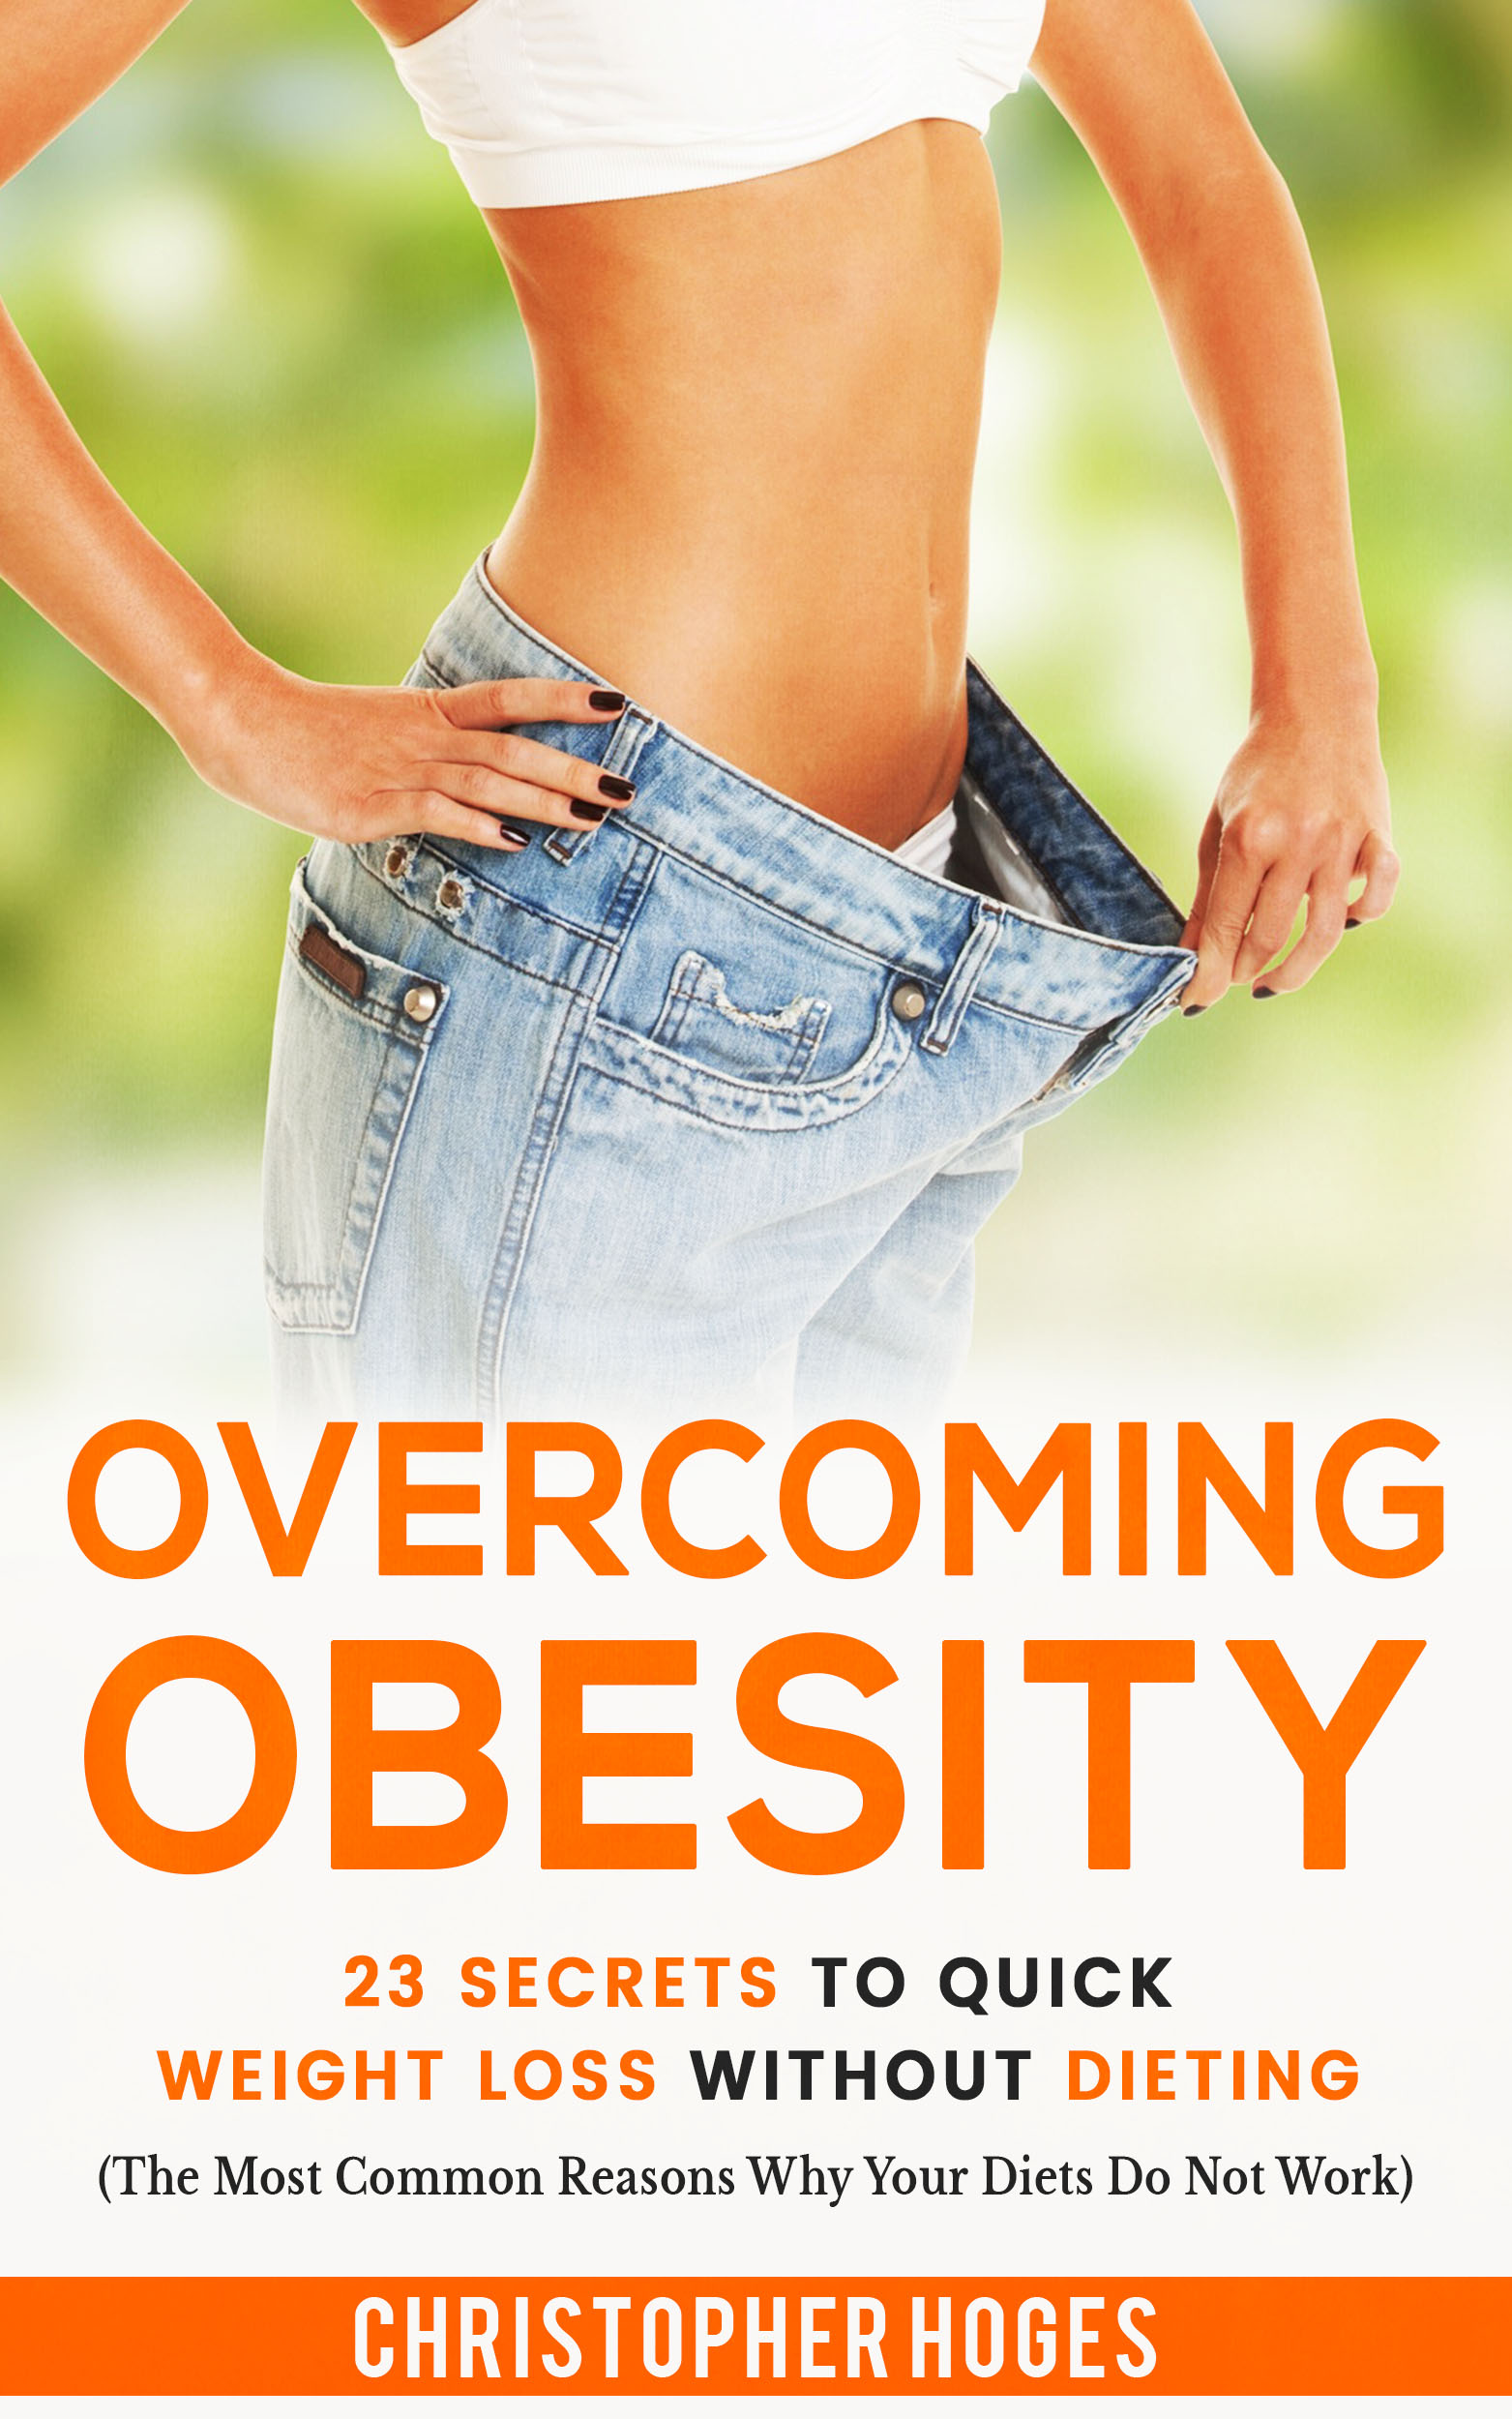 FREE: Overcoming Obesity: 23 Secrets To Quick Weight Loss Without Dieting by CHRISTOPHER HOGES